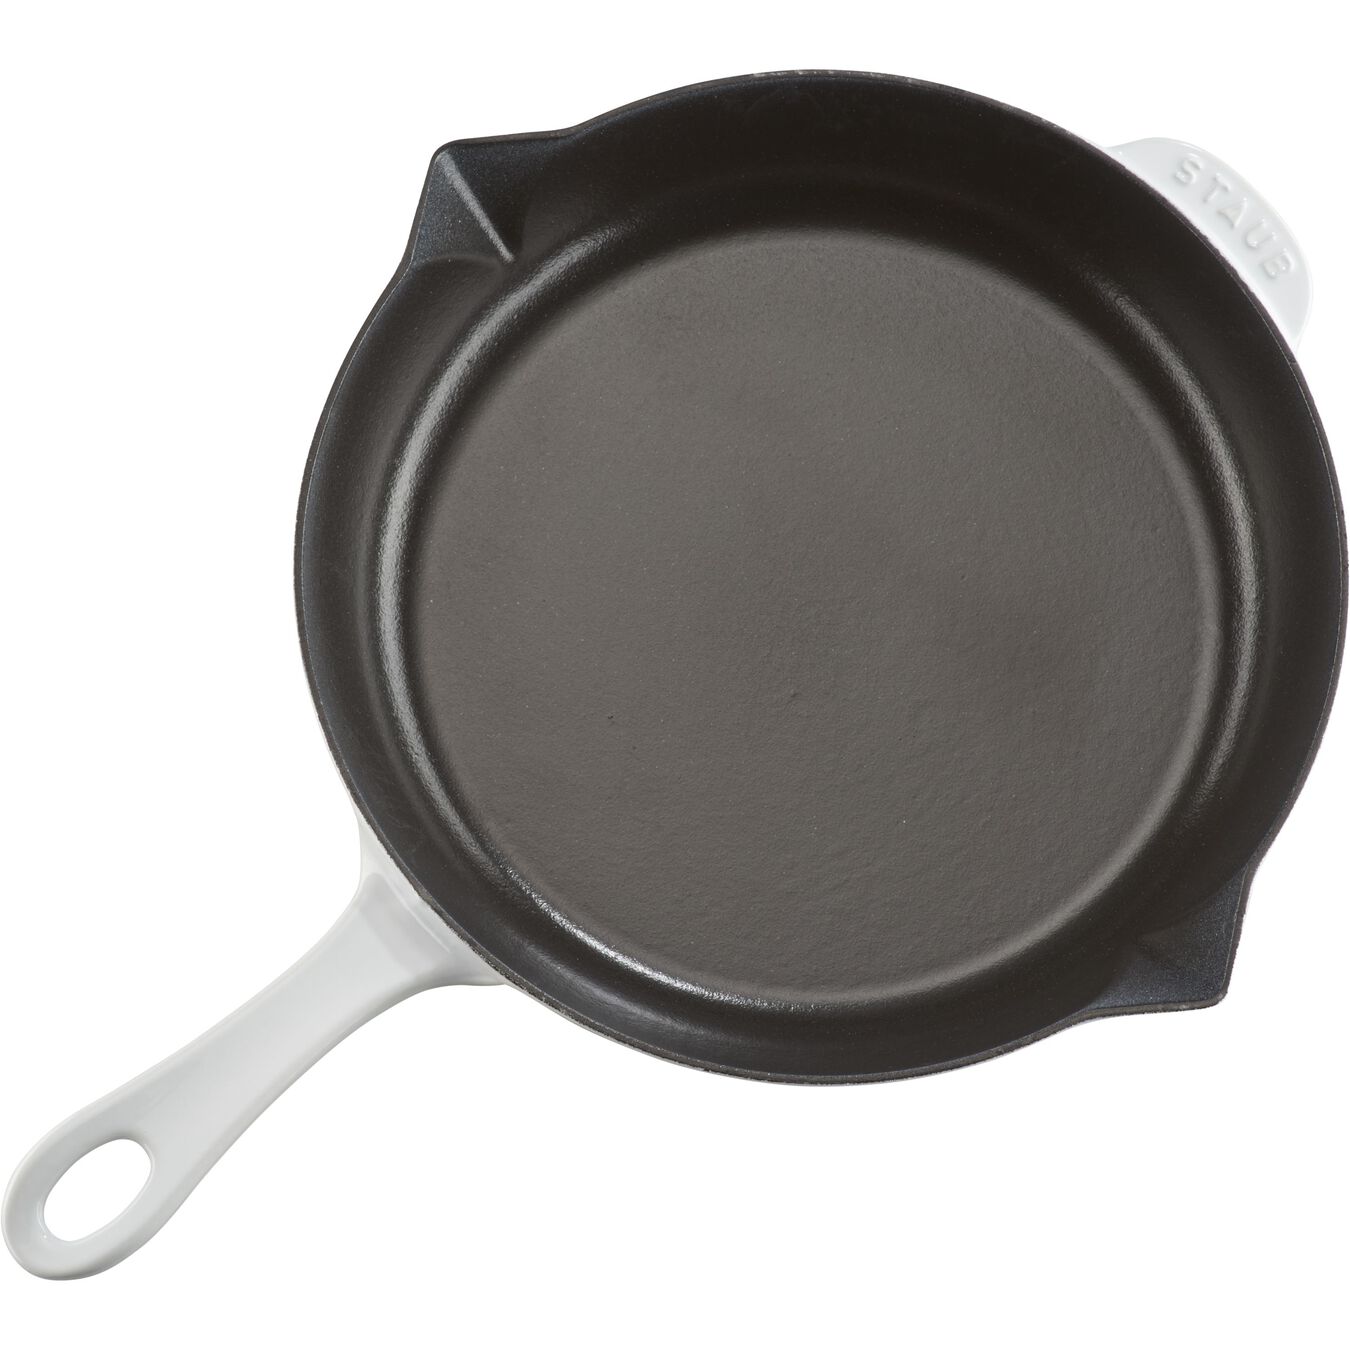 26 cm / 10 inch cast iron Frying pan, pure-white - Visual Imperfections,,large 2